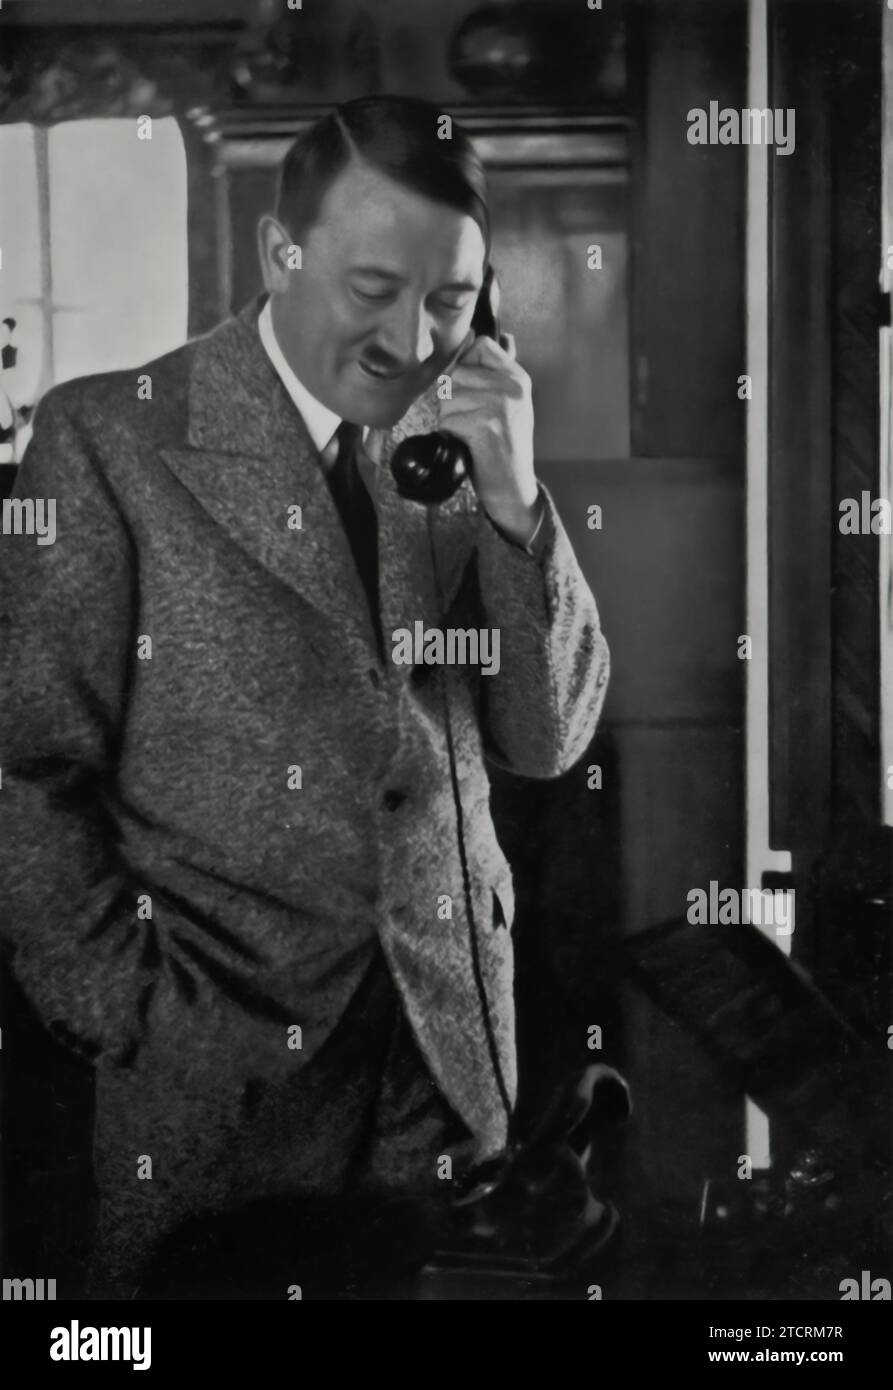 Adolf Hitler, visibly pleased, is on the phone on the morning of January 15, 1935, expressing his thanks to Gauleiter Josef Bürckel. Bürckel played a key role in the Nazi campaign for the Saar plebiscite, where a decisive 90% voted for reunification with Germany. This photo captures a significant moment of triumph for the Nazi propaganda, highlighting their increasing dominance. Stock Photo